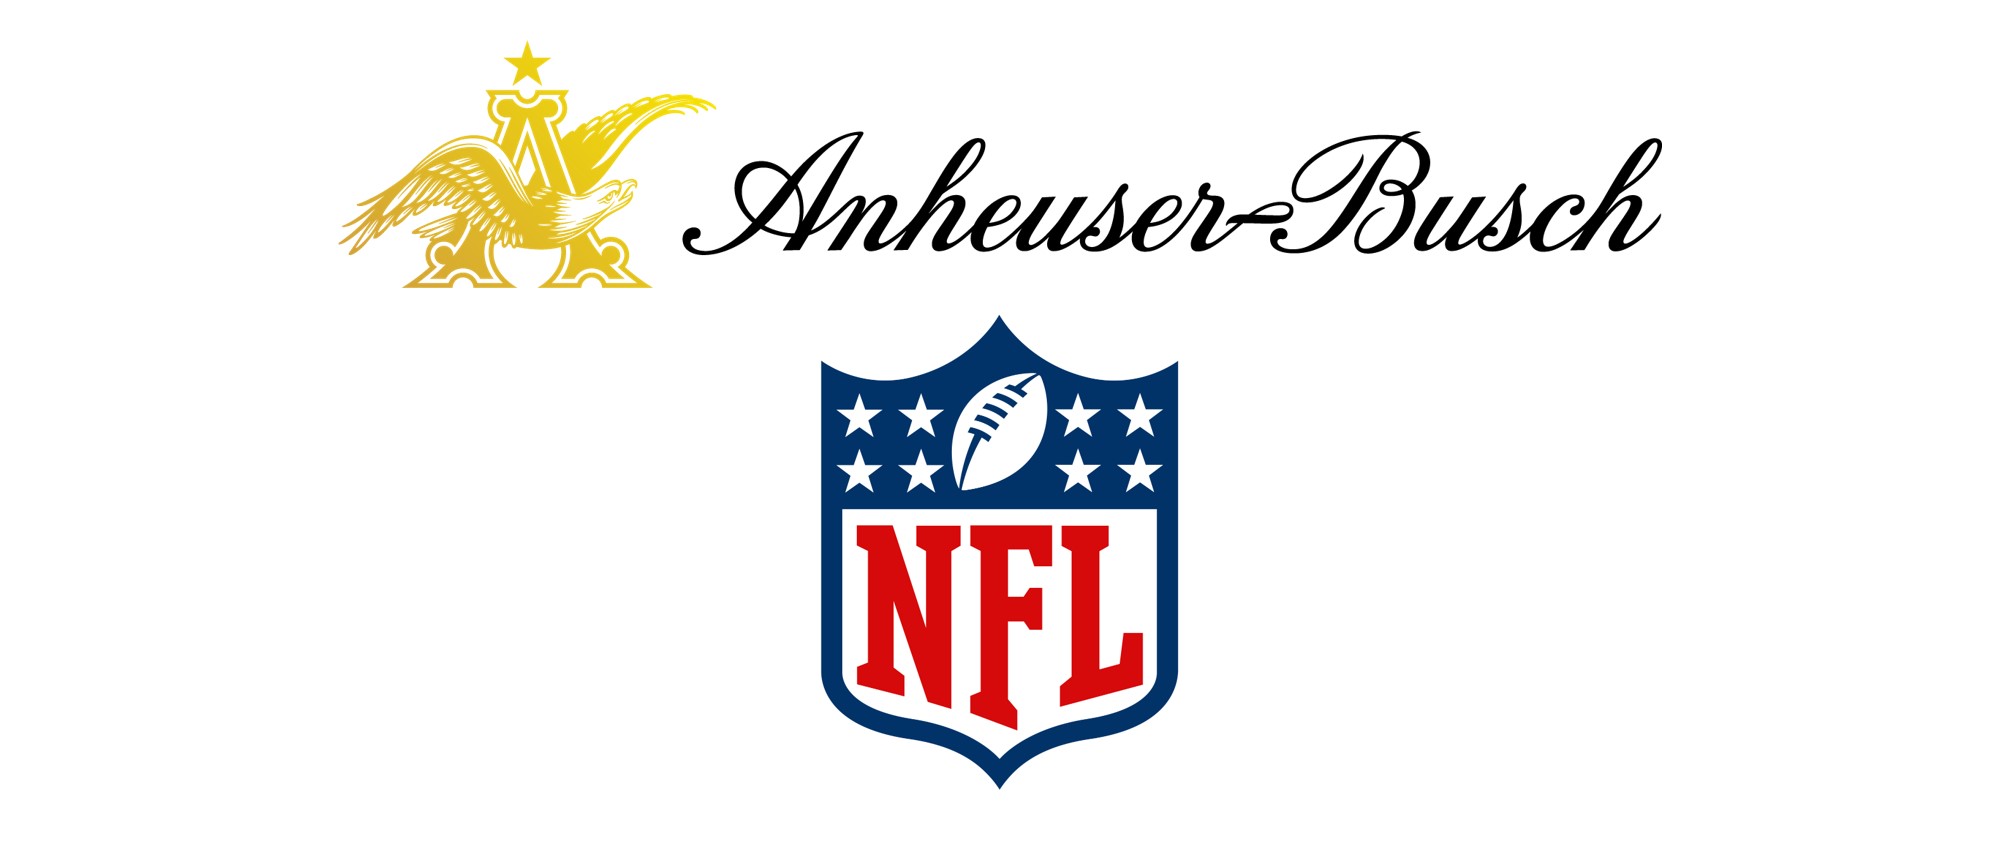 Starting with the NFL Draft, AnheuserBusch’s New MultiYear Deal with